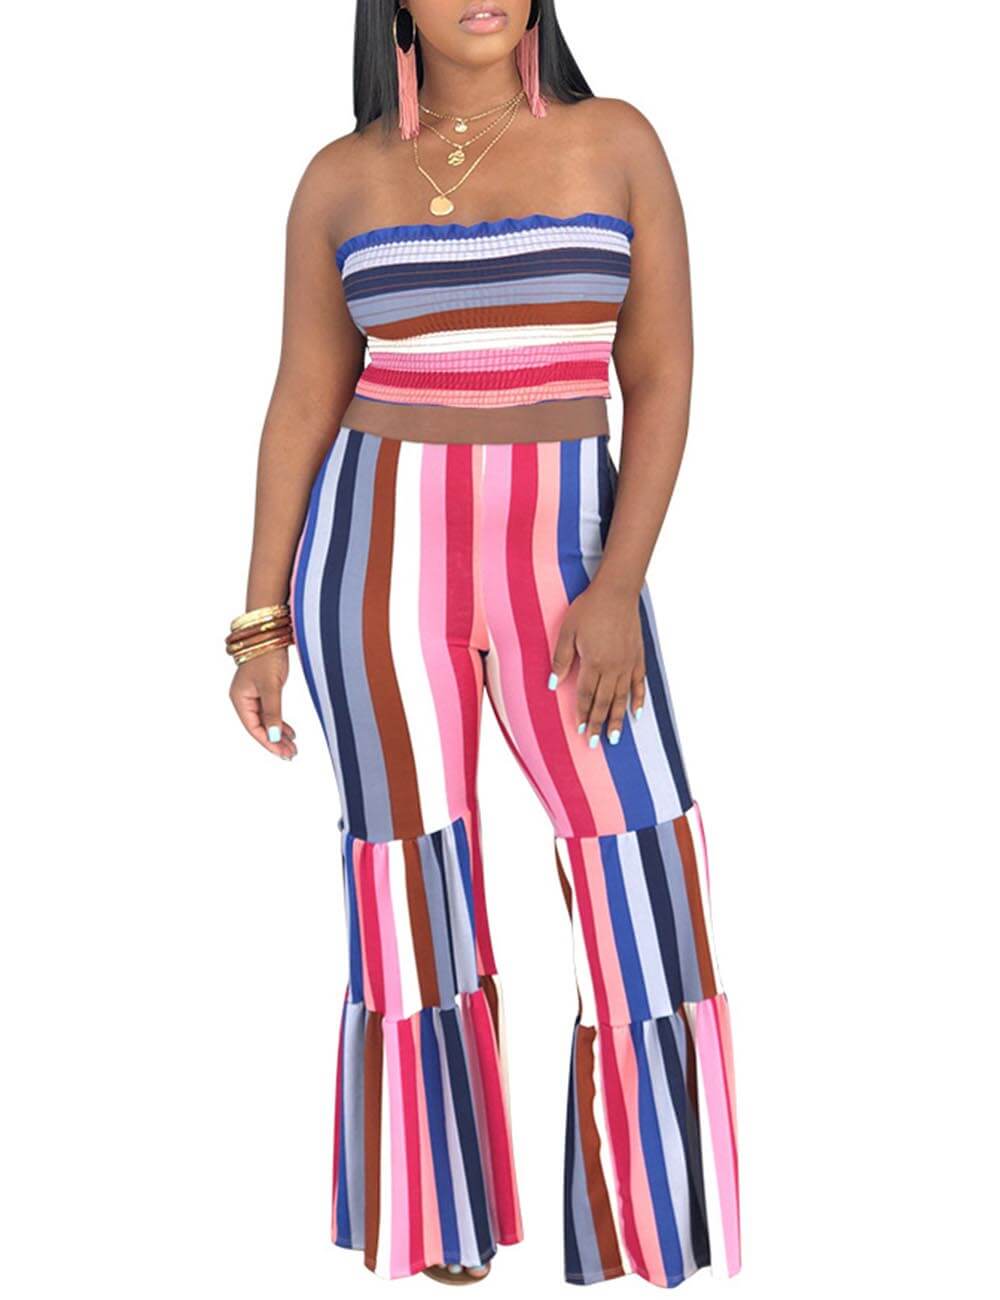  Women's Rainbow Striped Strapless Jumpsuit Printed Long Romper Tube Crop Top Wide Leg Pants 2 Pieces Outfits Set